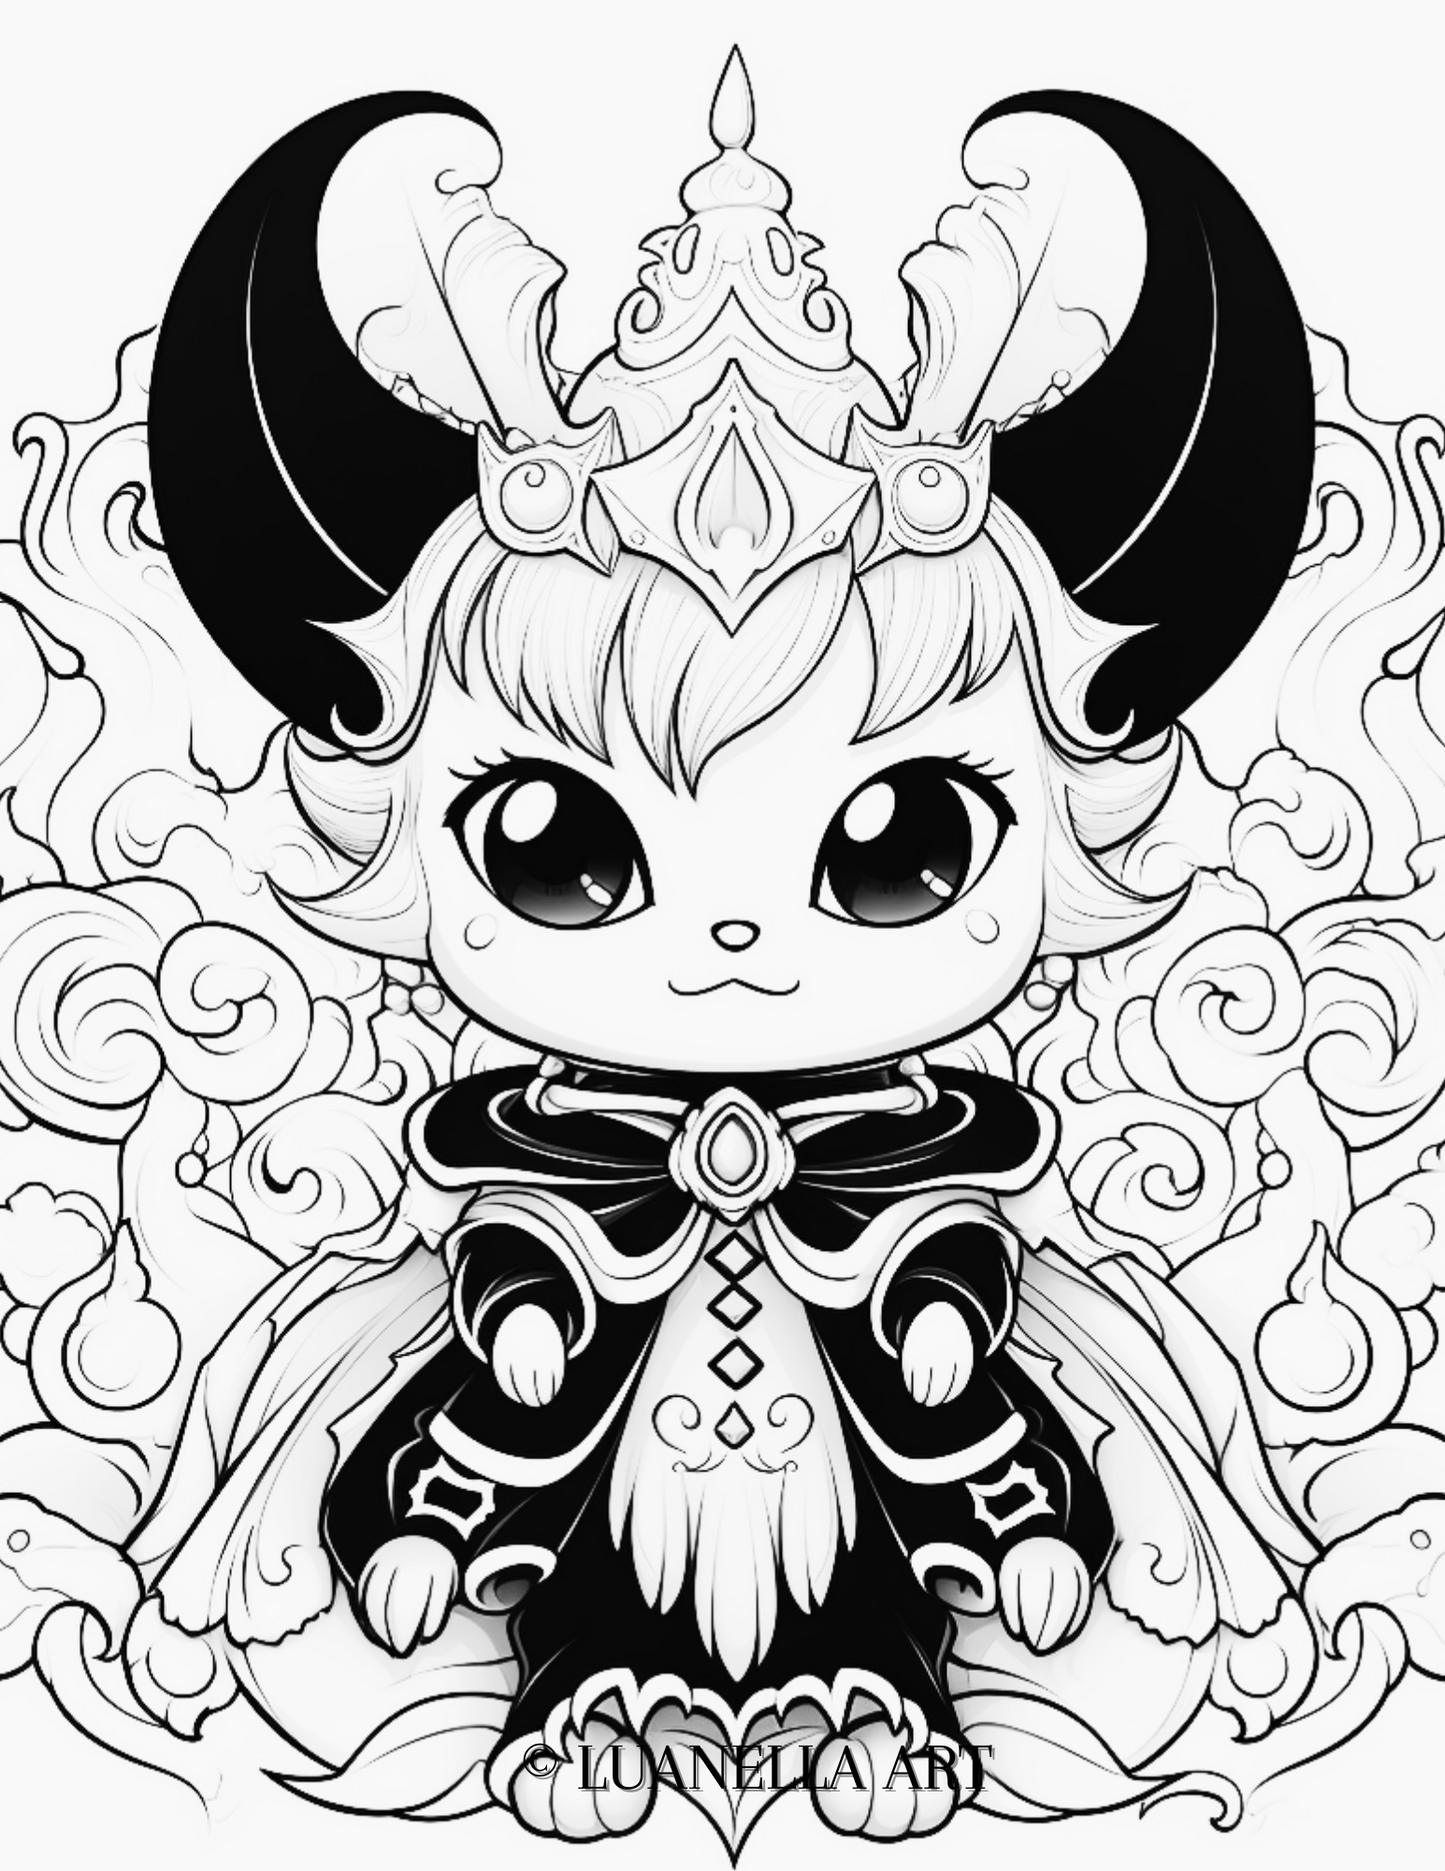 Cute Halloween Animal Devil Coloring  | Coloring Page | Instant Digital Downl